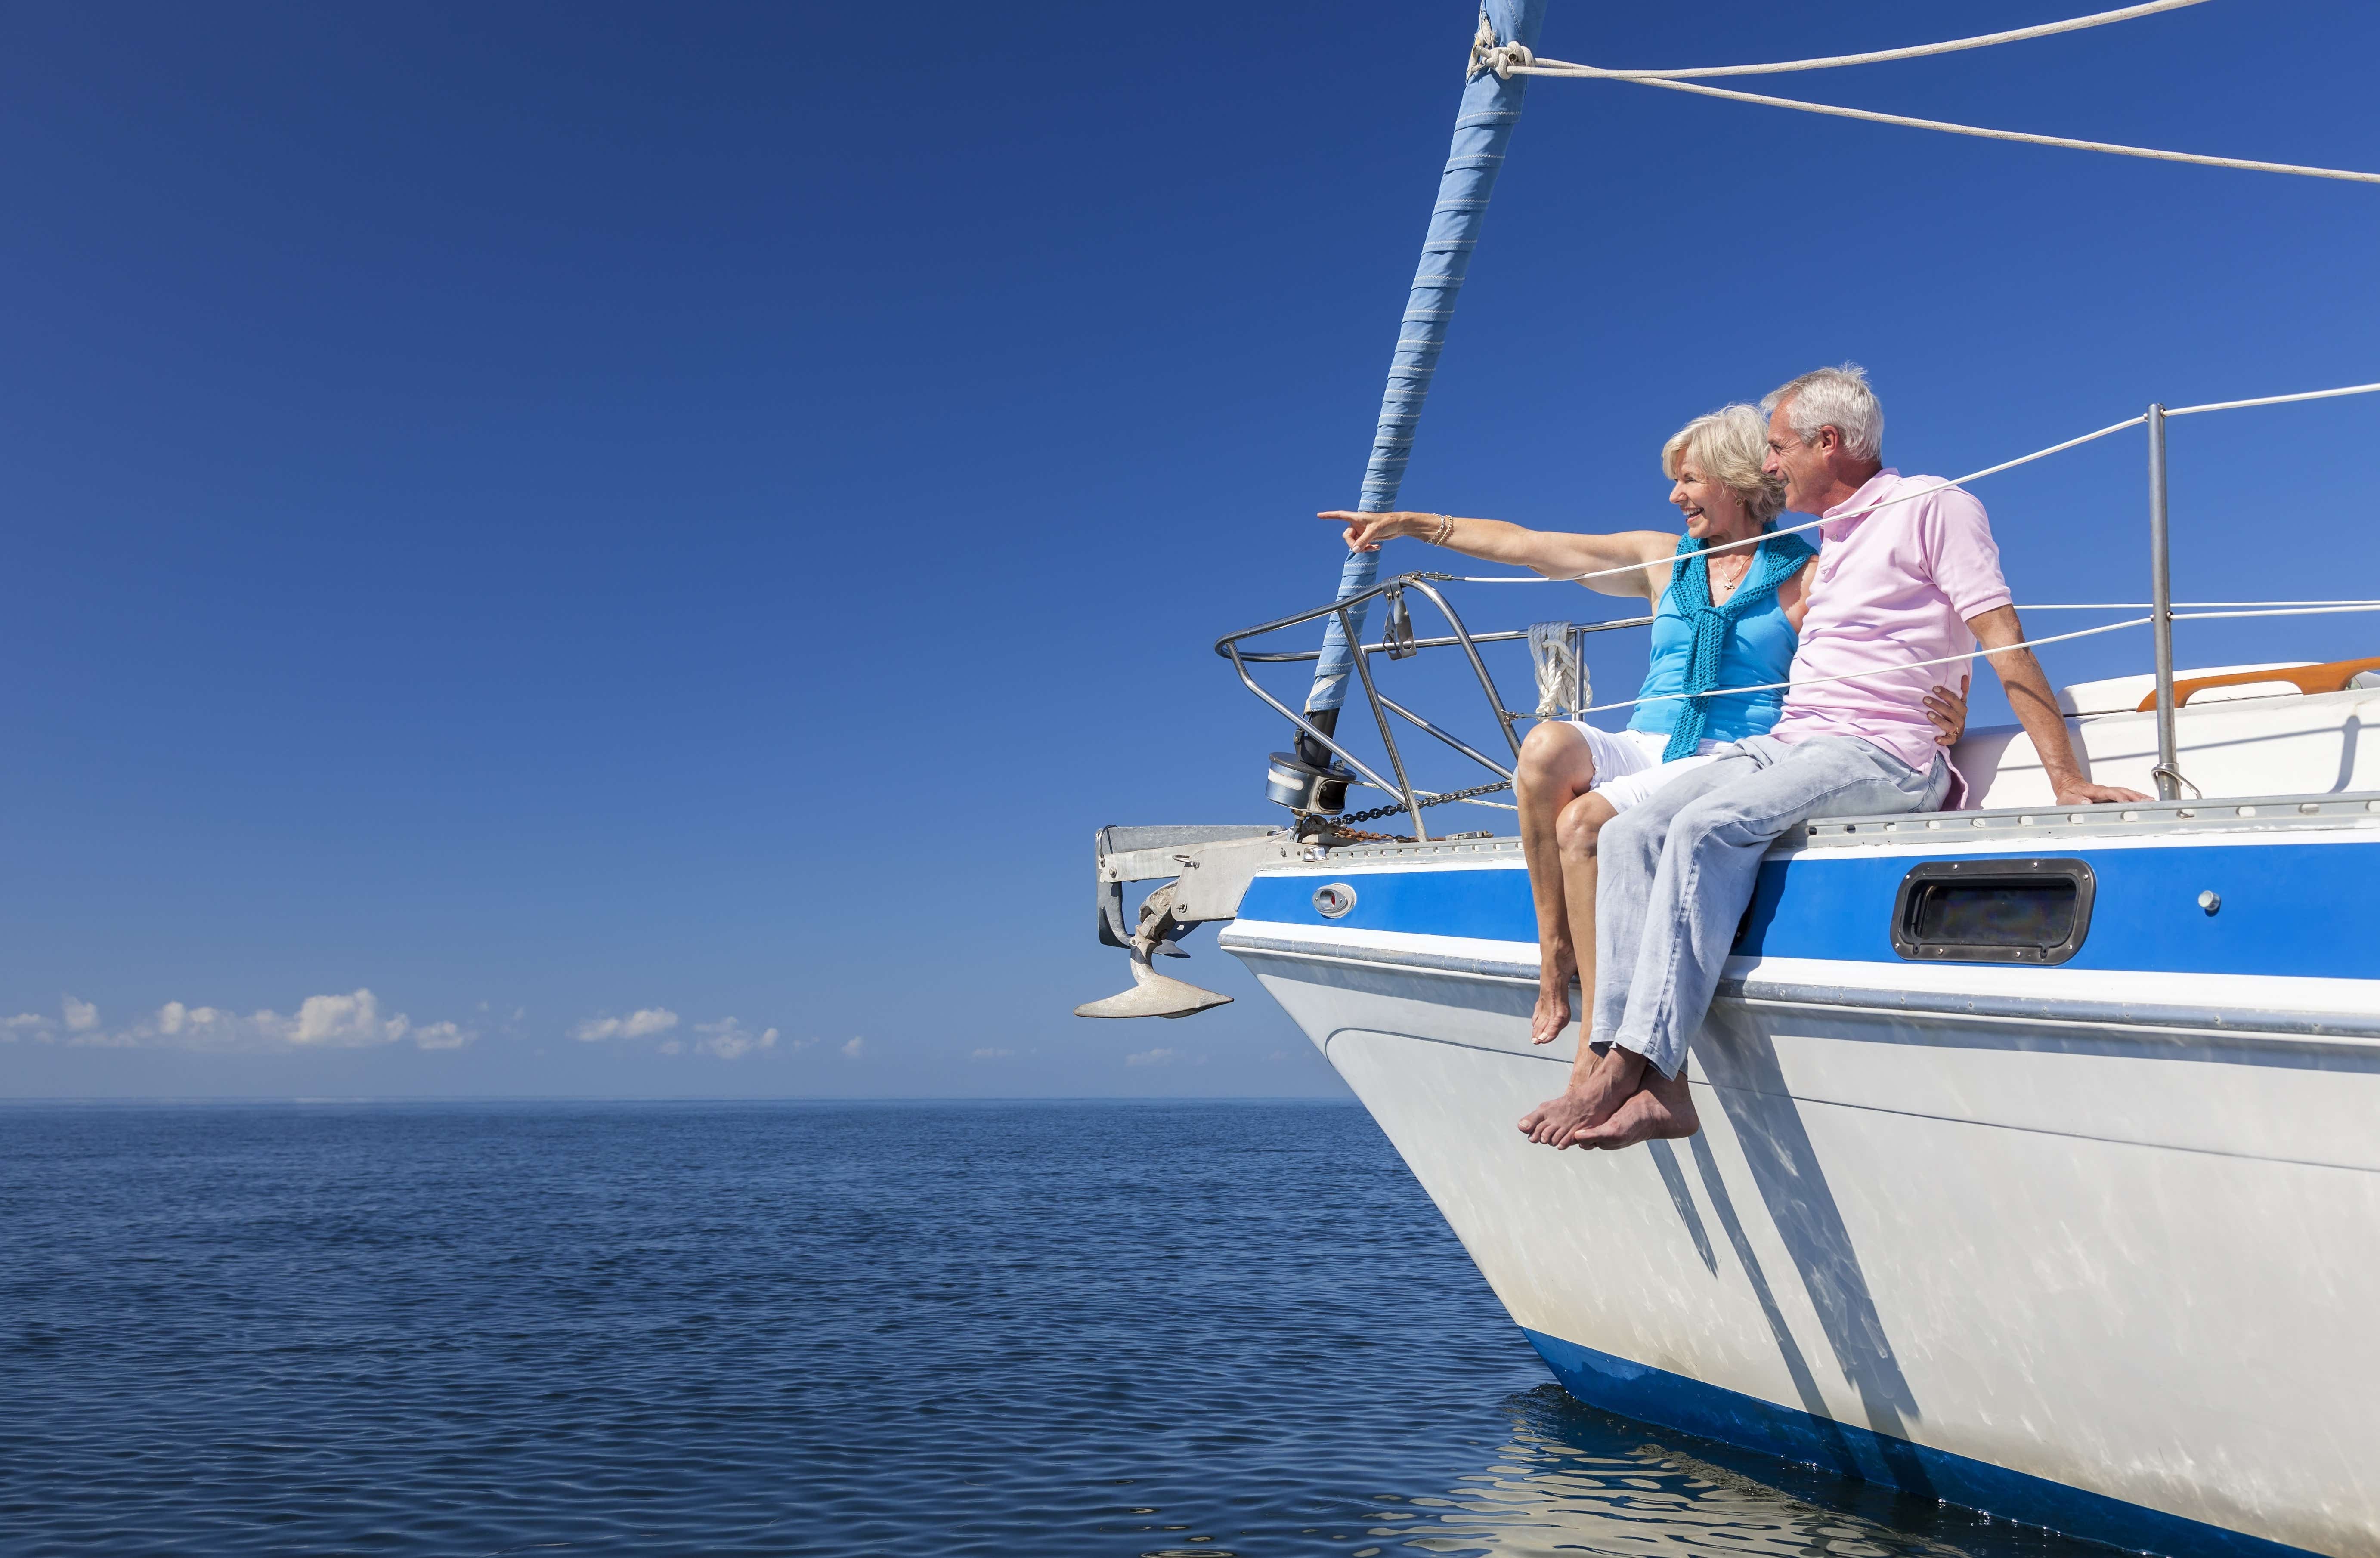 A happy couple sit on a yacht under clear blue skies